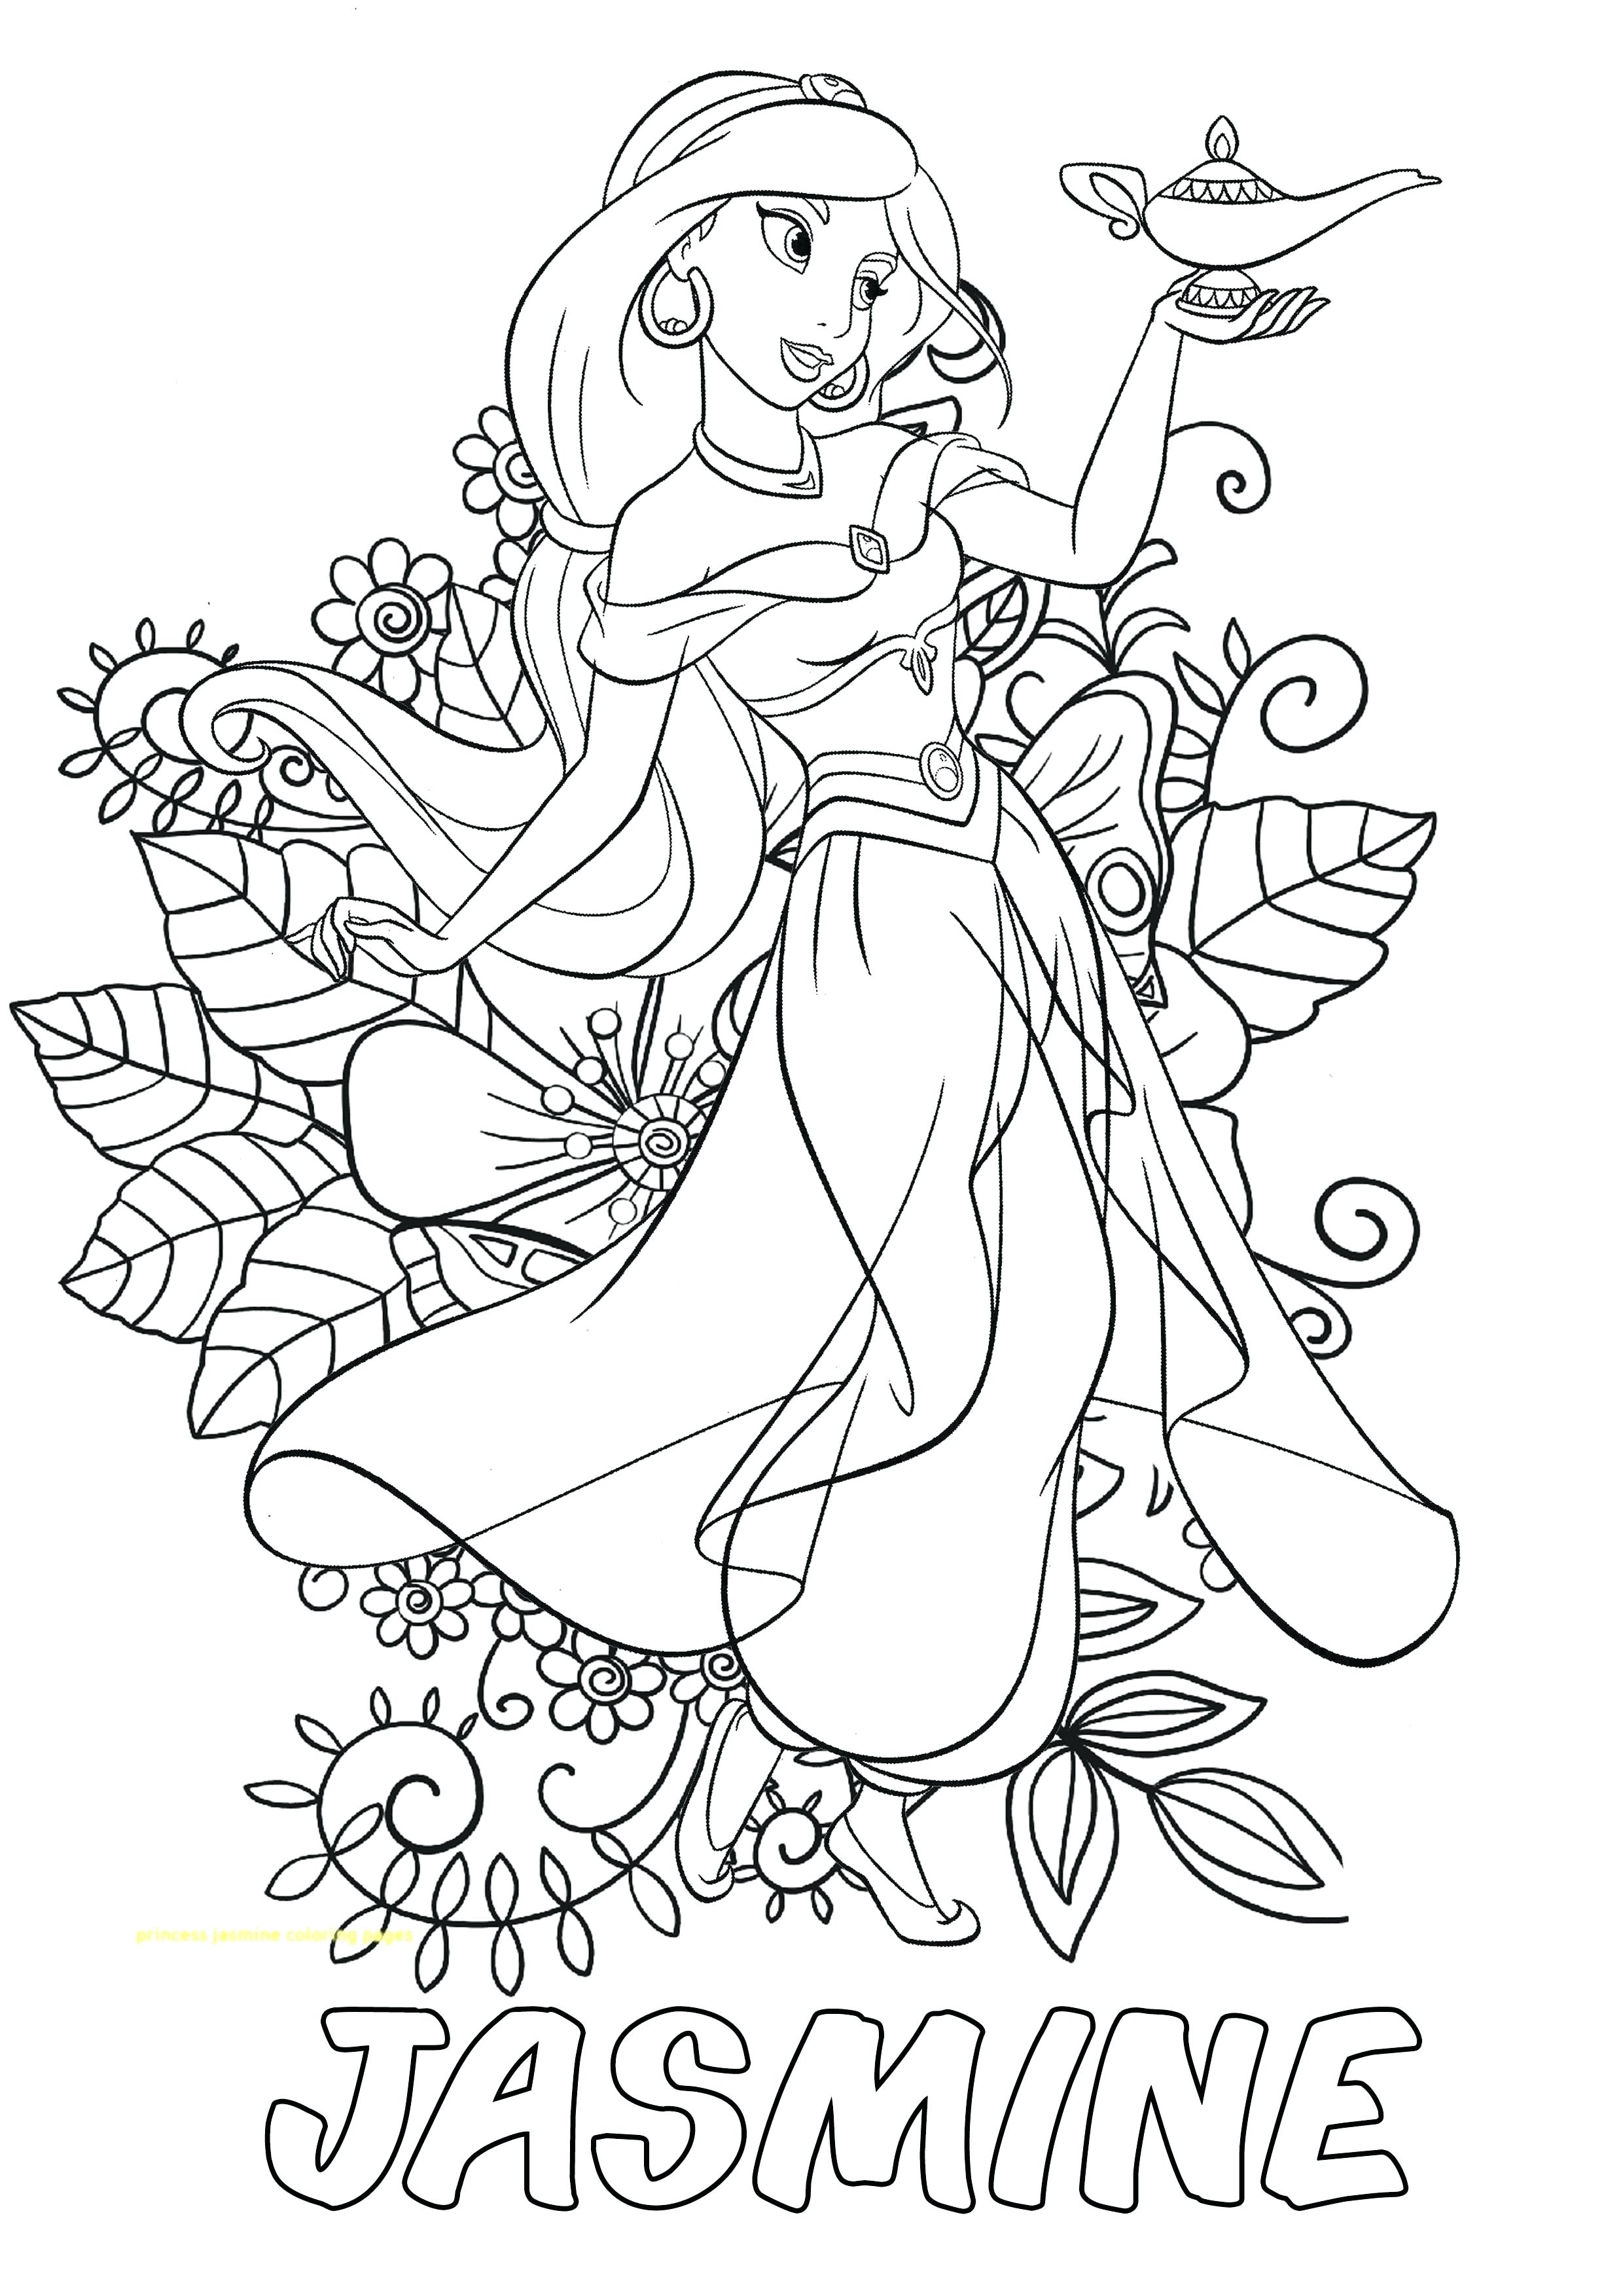 Genie Coloring Pages - Coloring Home